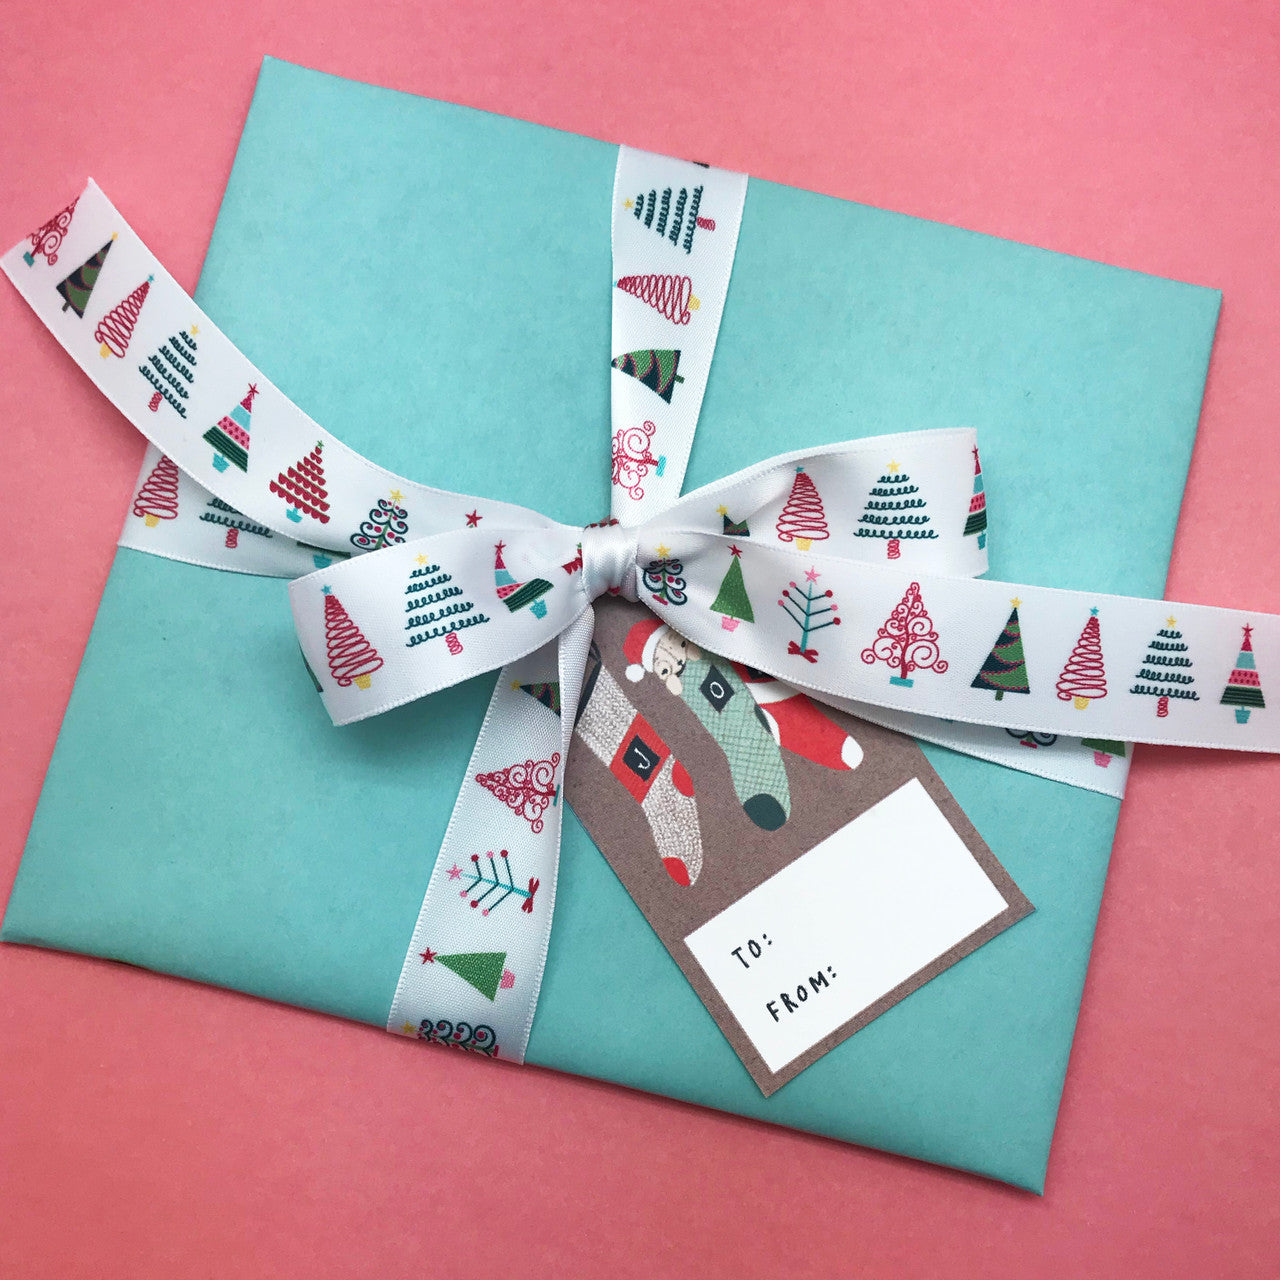 Make your presents extra special with this fun ribbon tied on non traditional colored paper for a fun twist on Christmas gift wrap!